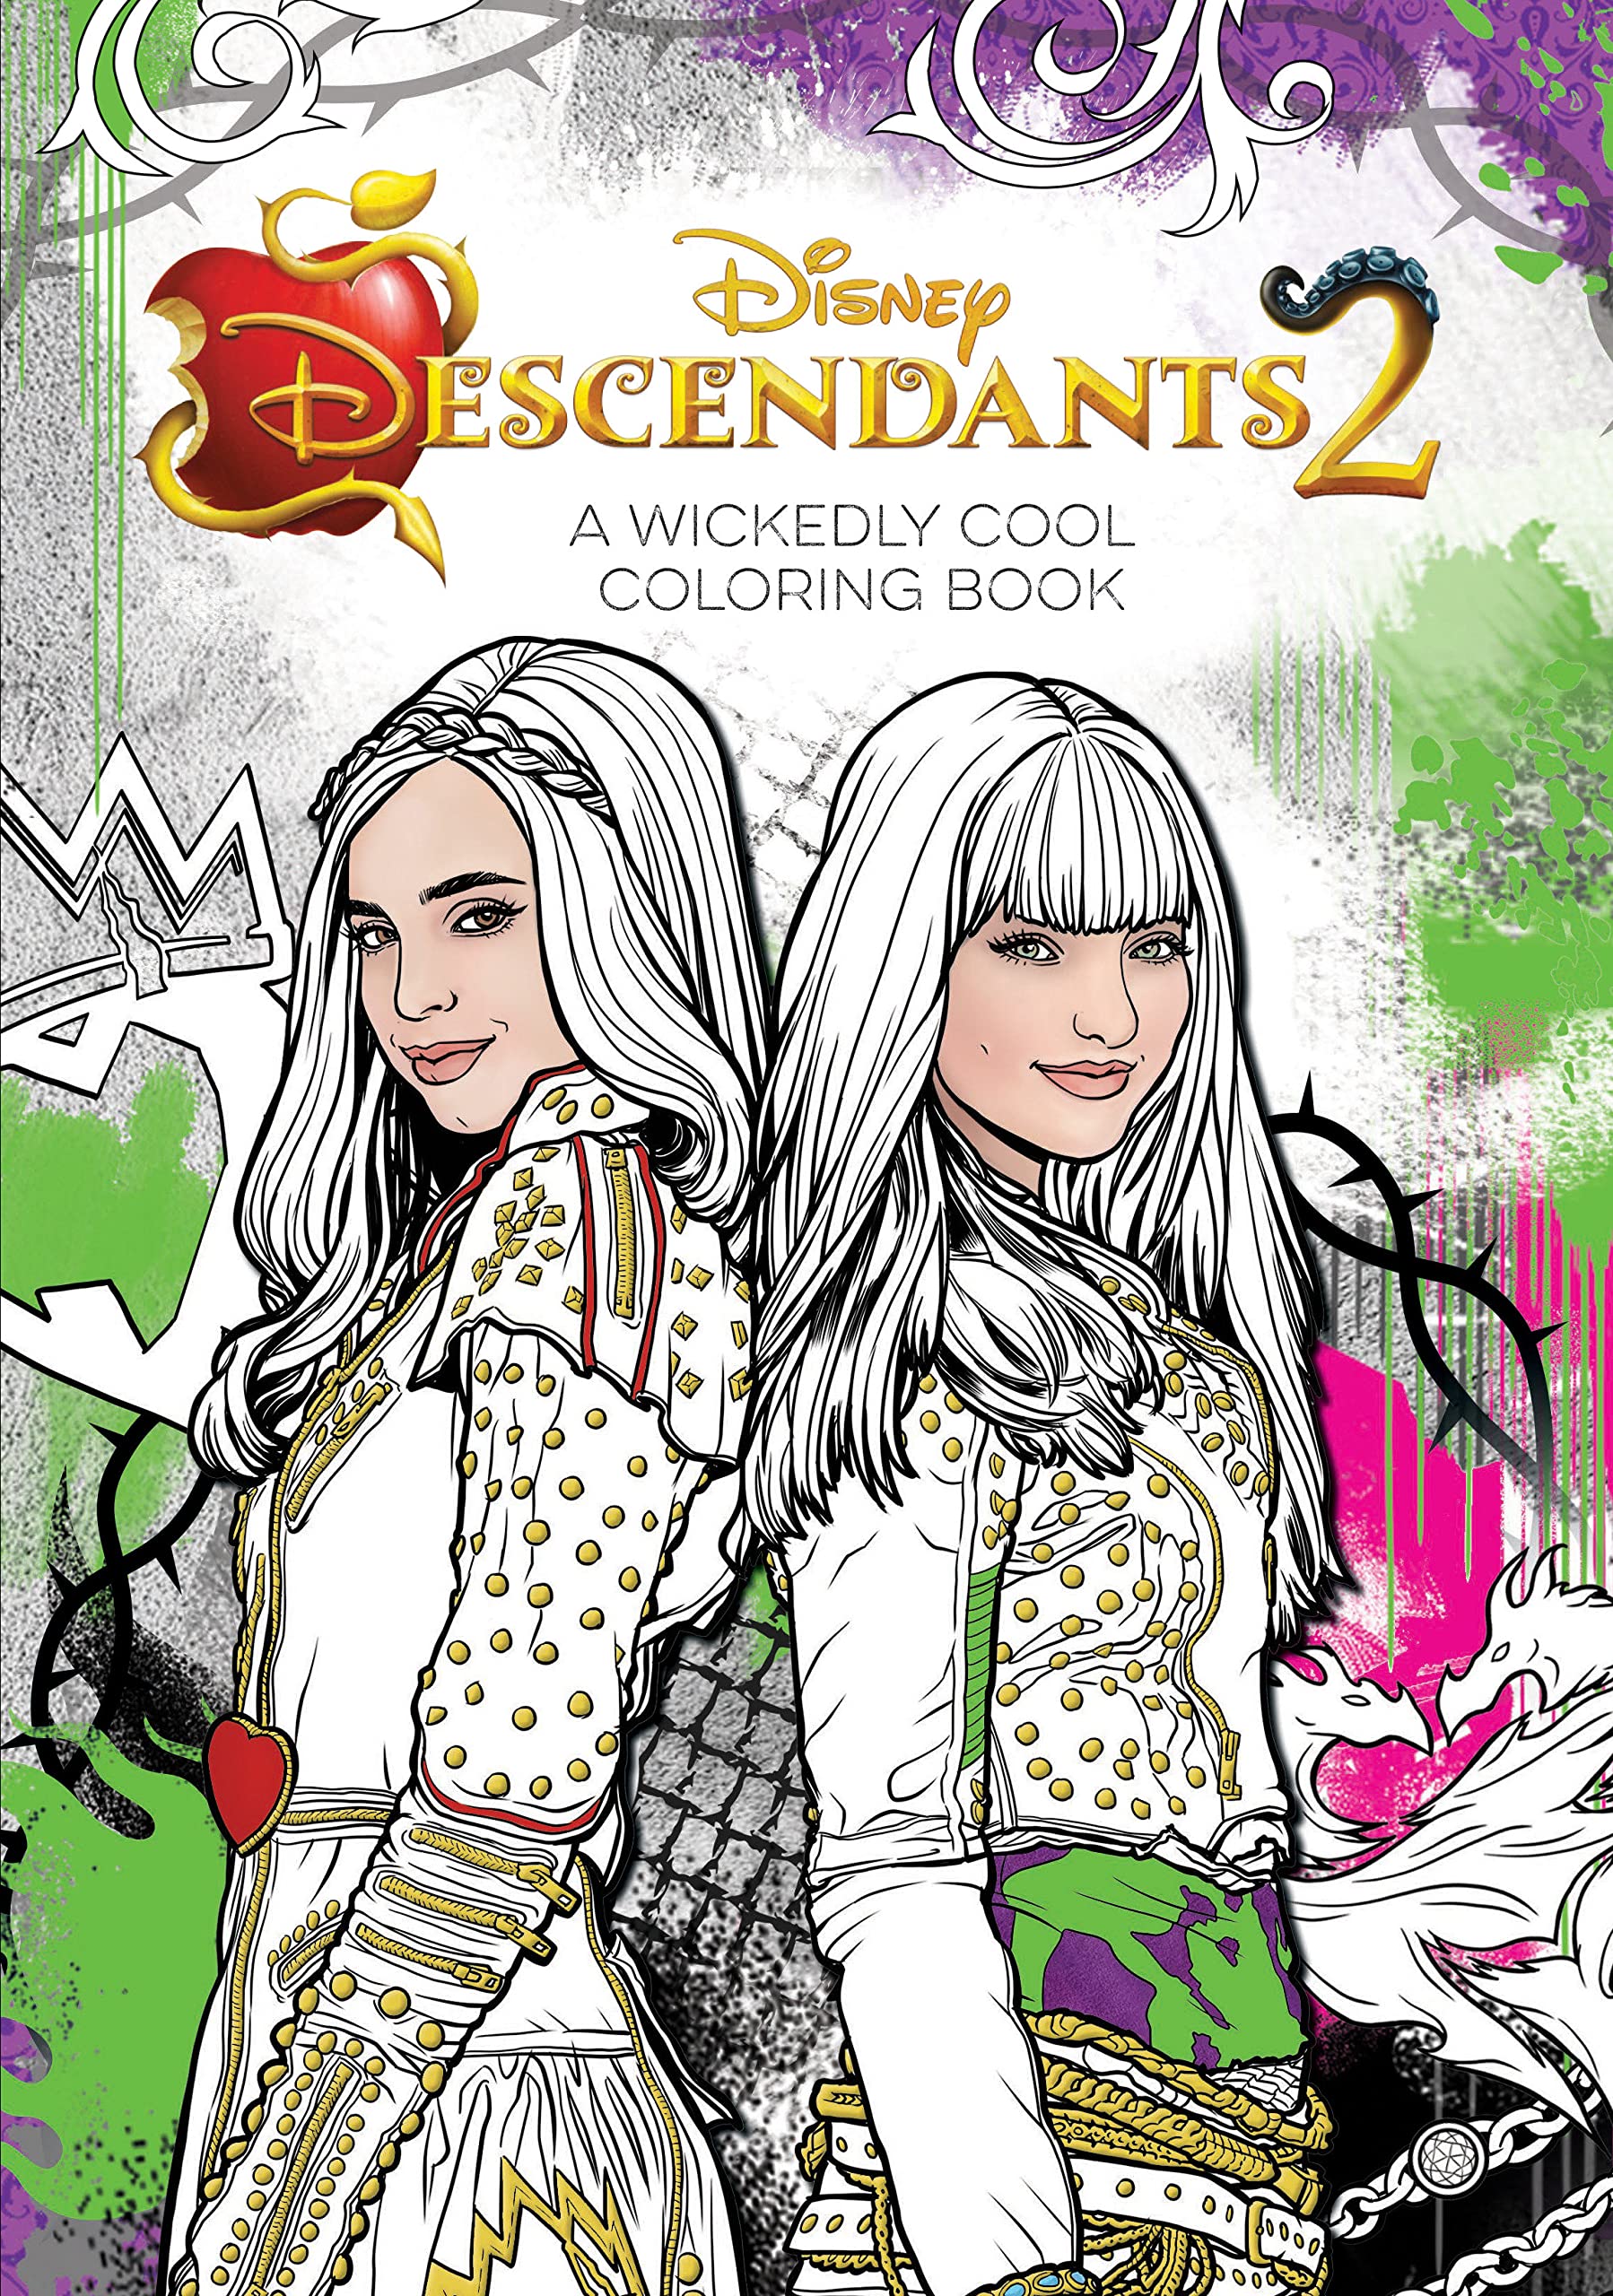 Descendants 2: A Wickedly Cool Coloring Book (Art of Coloring)